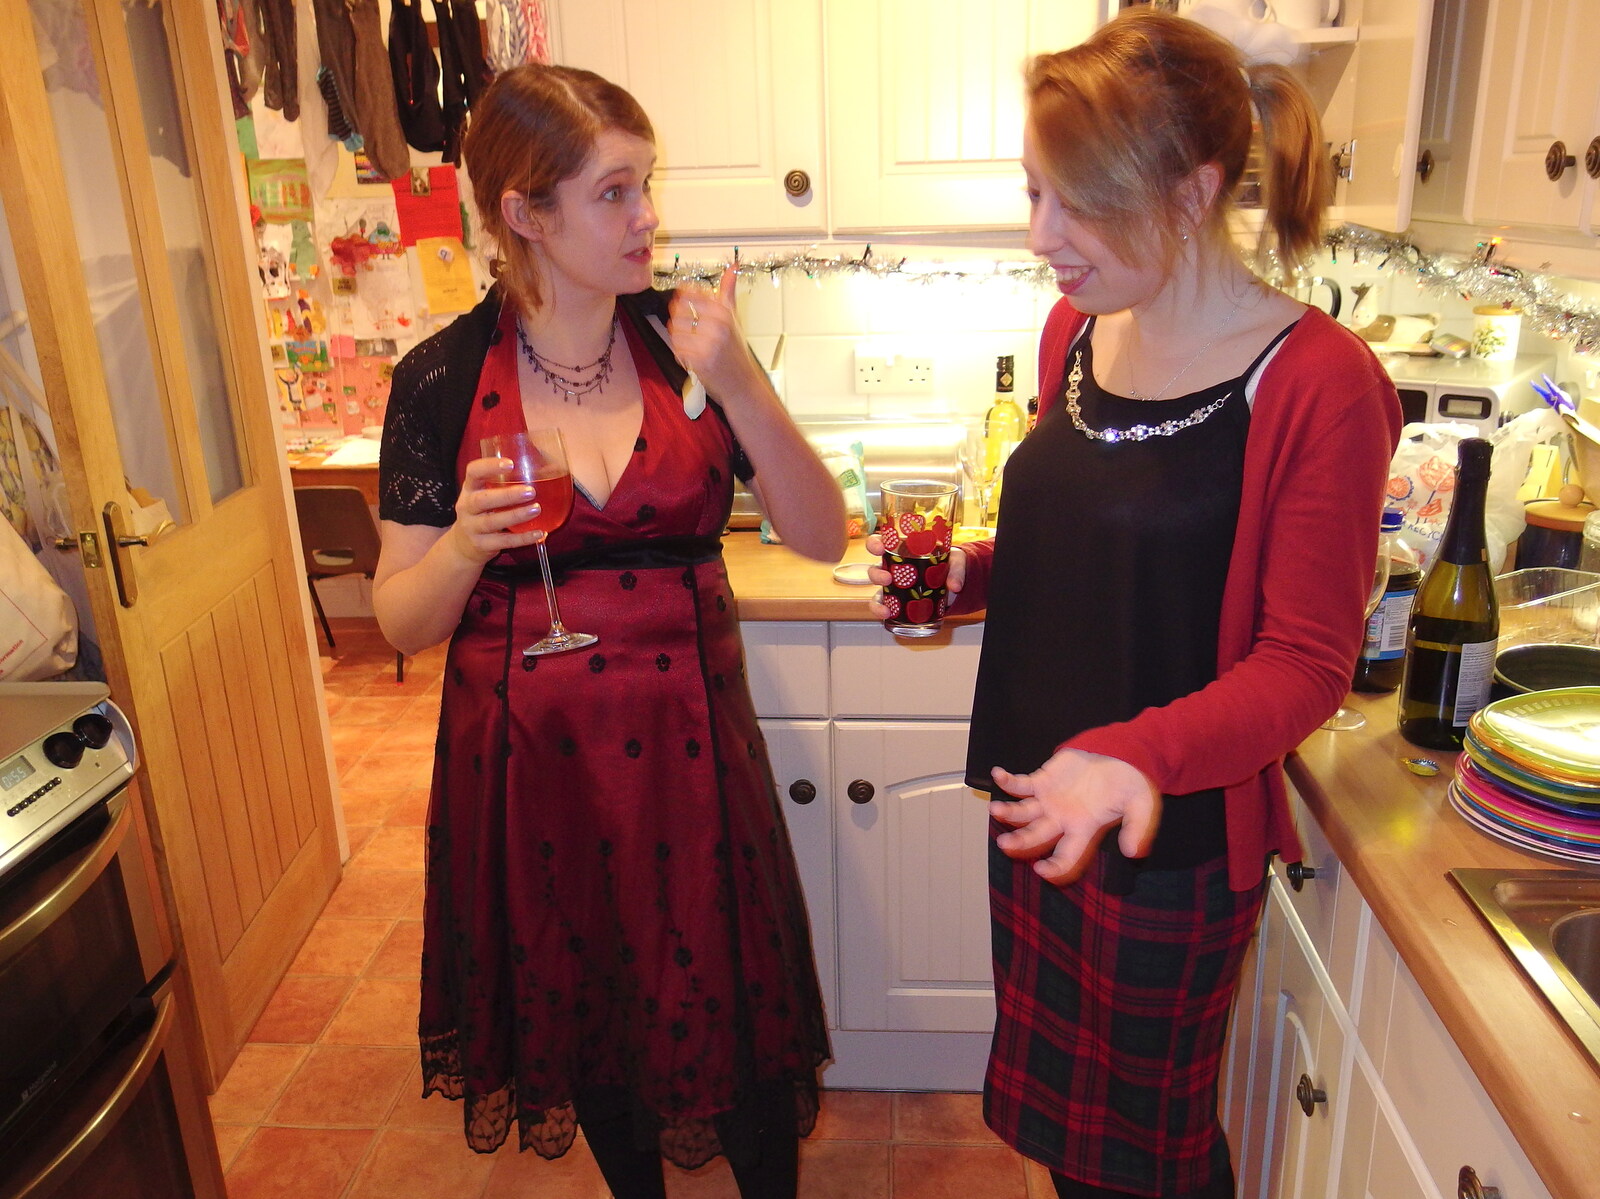 Isobel and Ellie in the kitchen from A Christmas Party, Brome, Suffolk - 21st December 2013